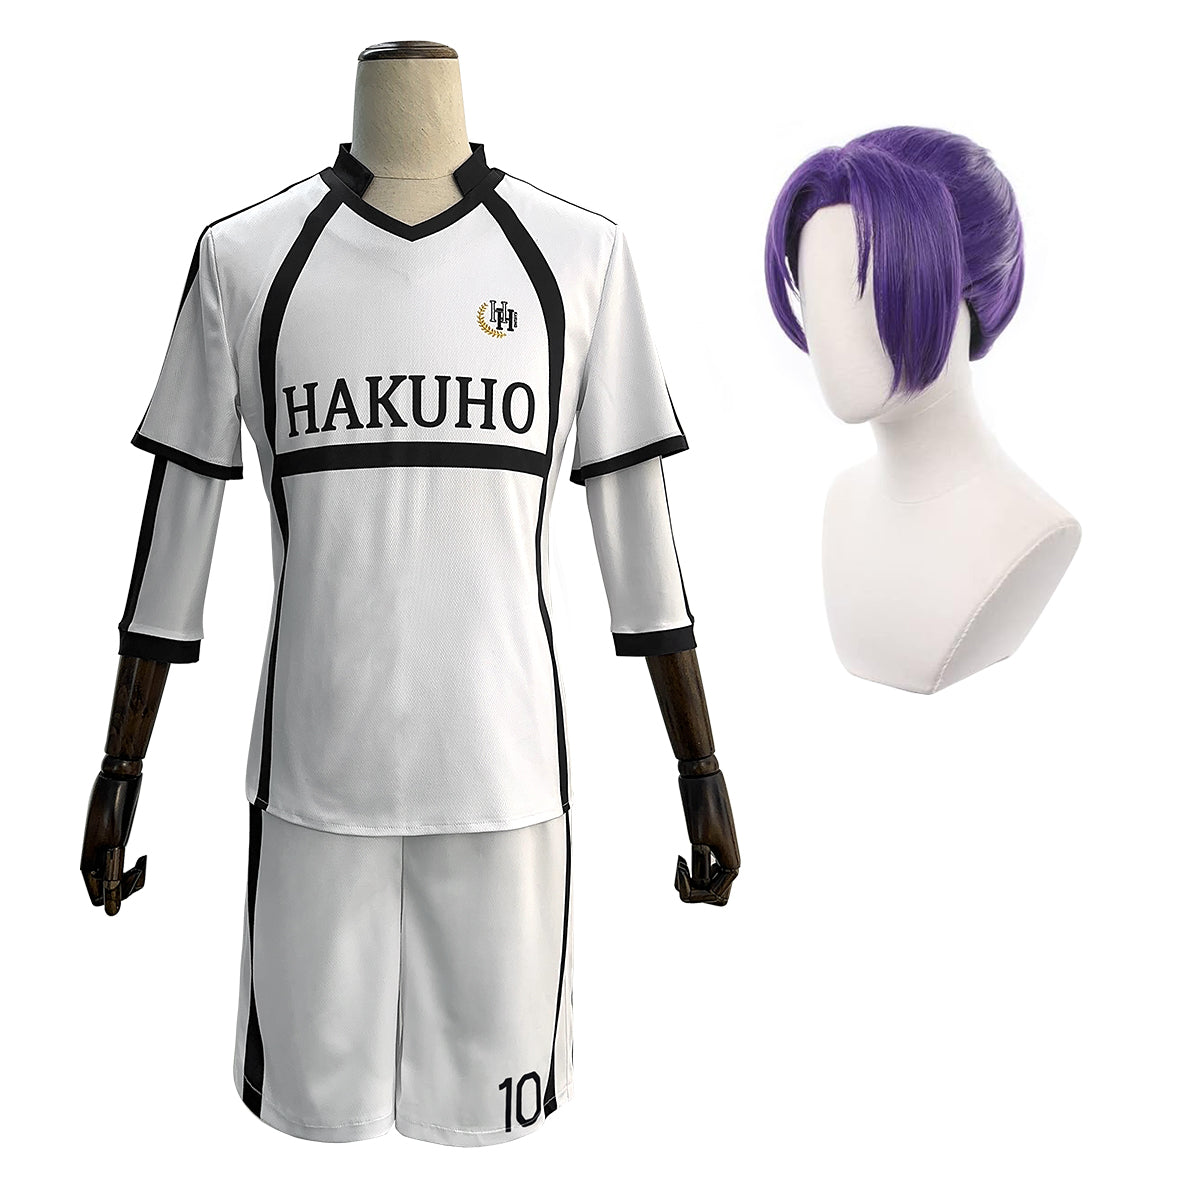 HOLOUN Blue Lock Anime Reo Mikage NO.10 Cosplay Costume Jersey Wig Rose Net Football Soccer Uniform Daily Sport Wearing